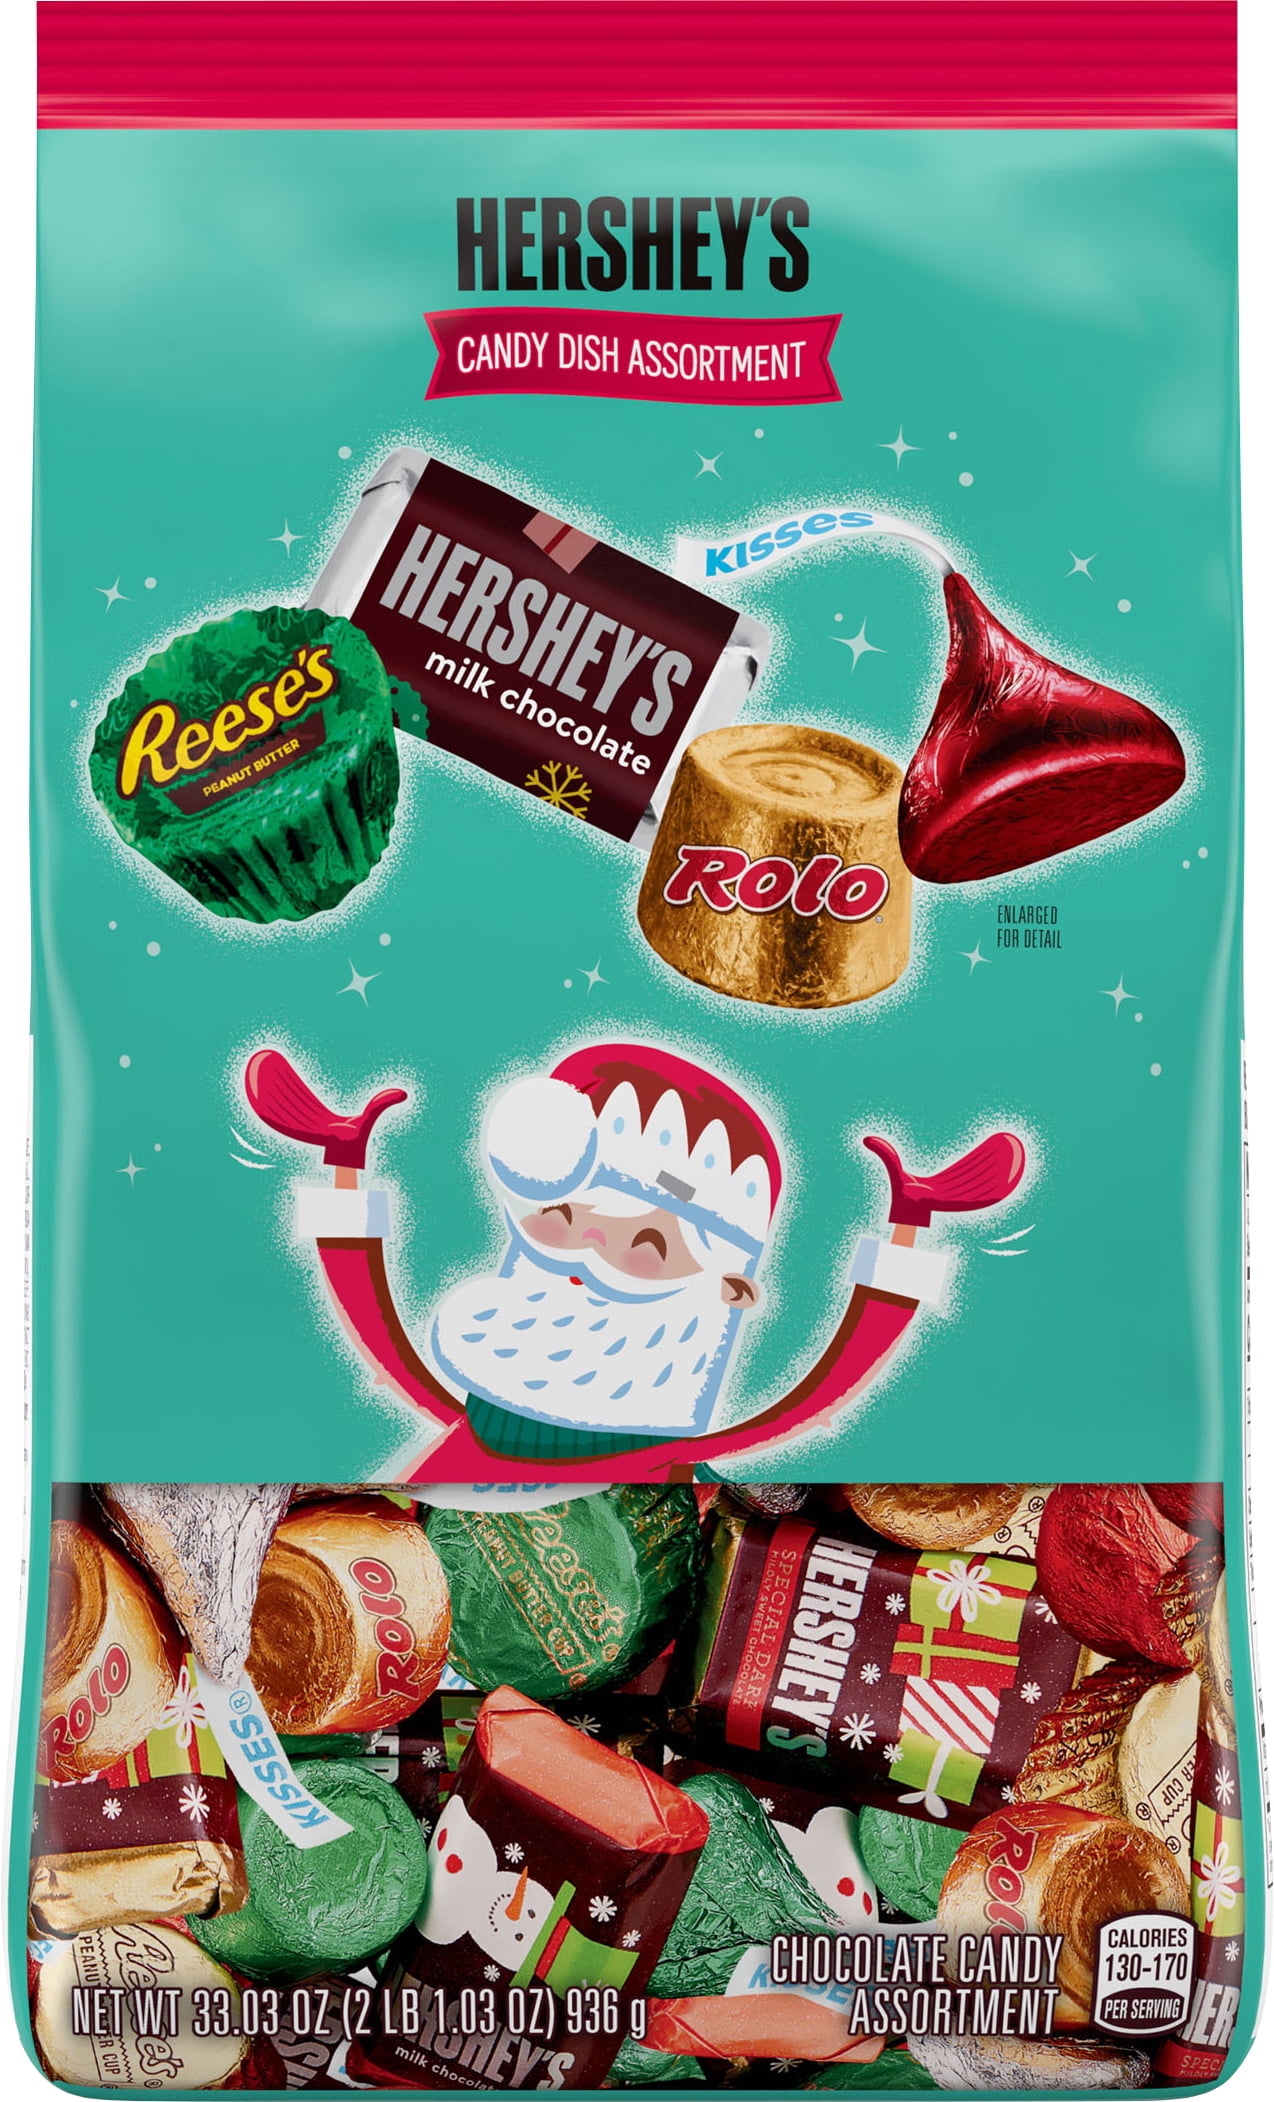 Hershey's Christmas Rolos 3.5 lb. Candy Jar - 1 Unit - Candy Favorites